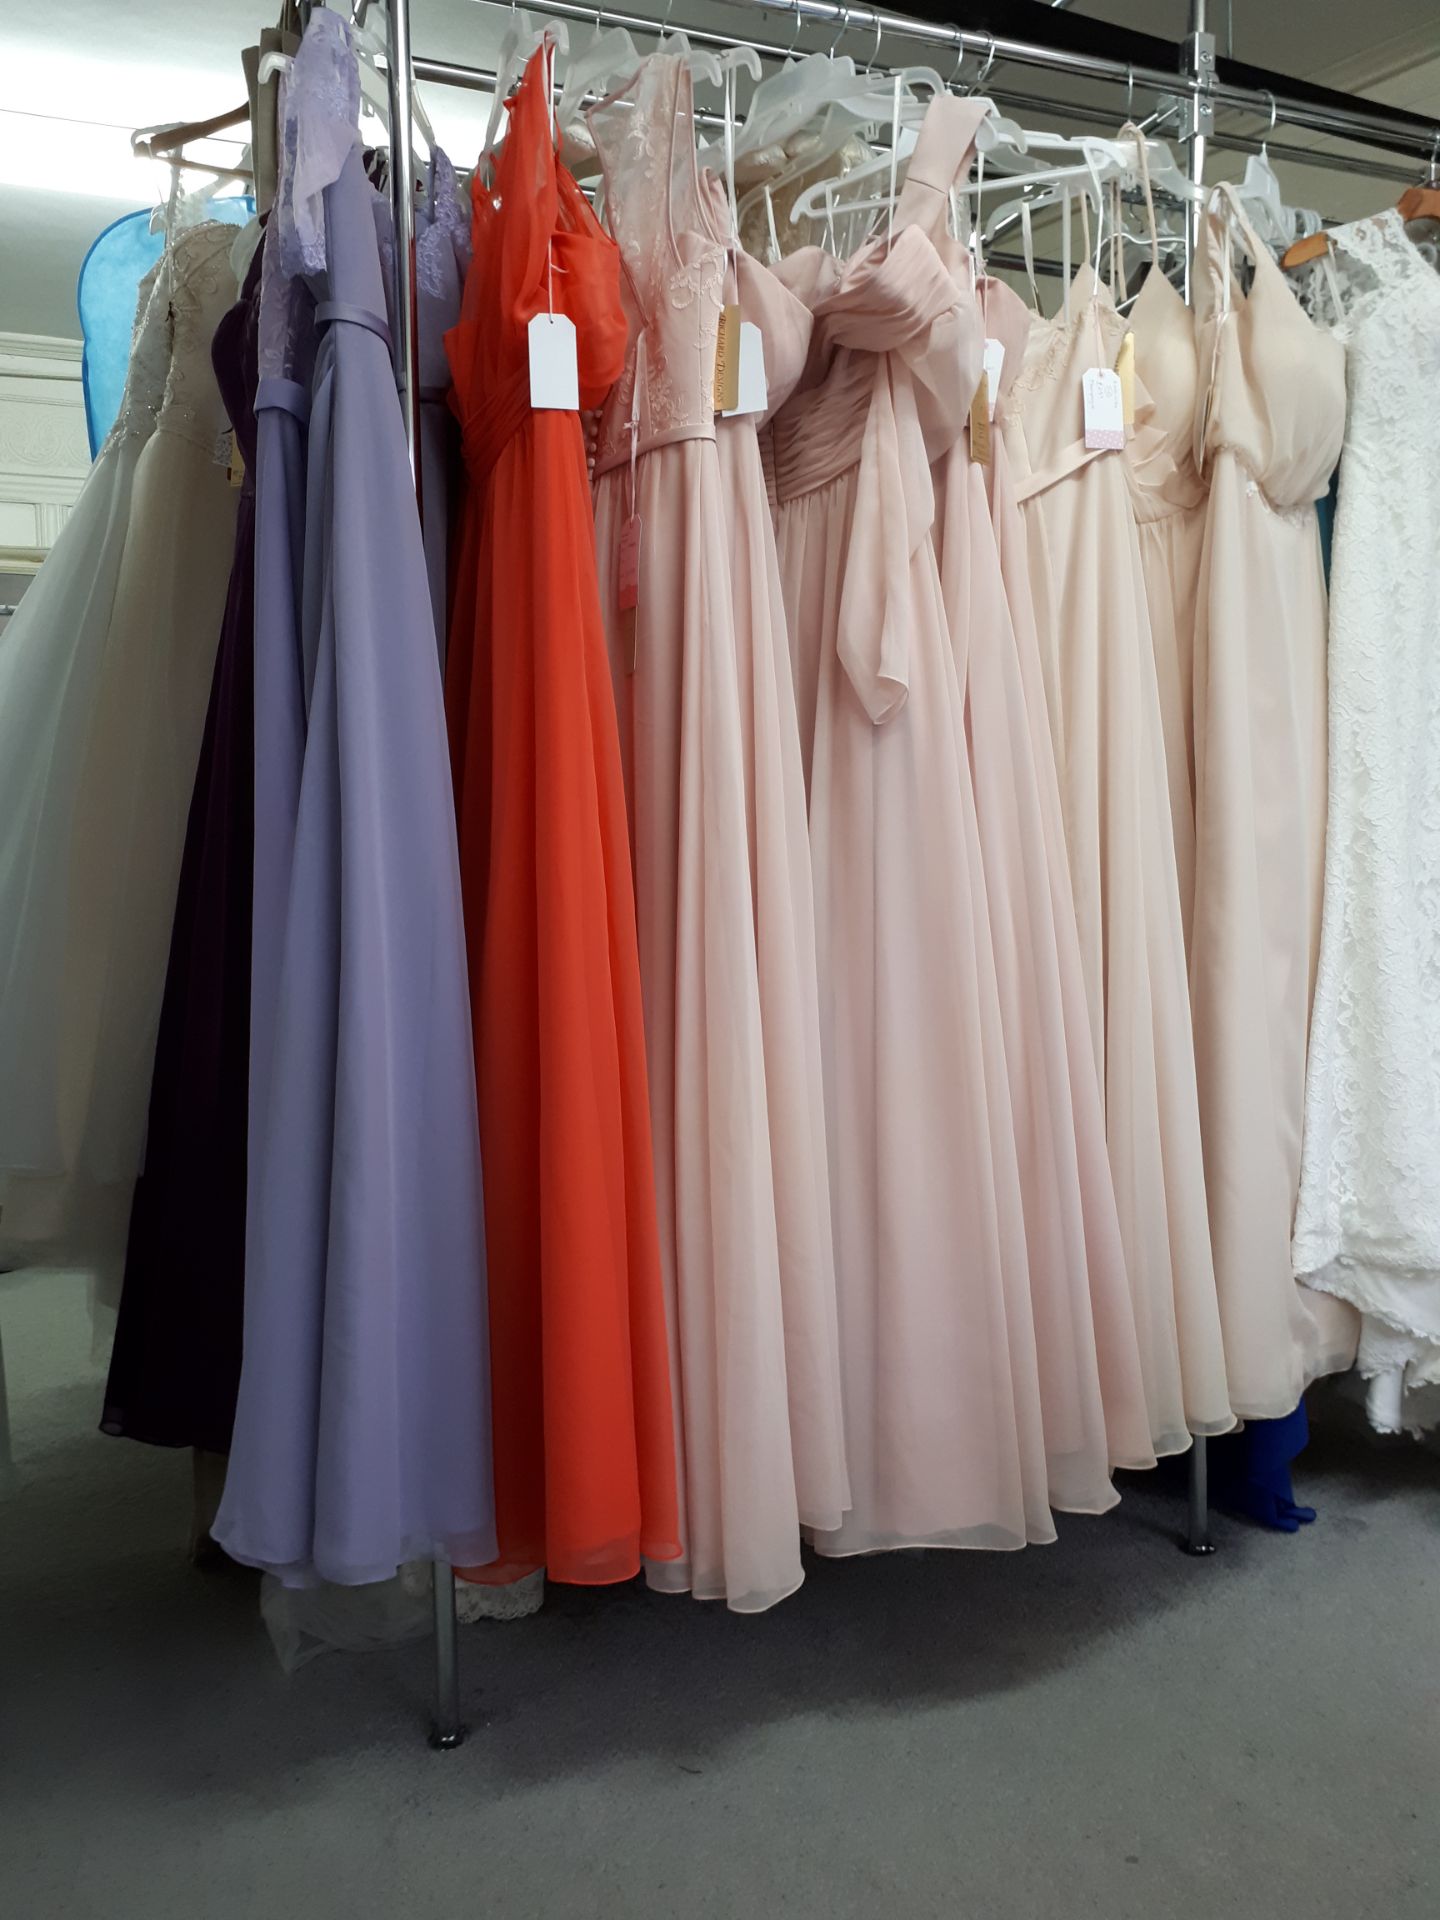 Richard Designs Dresses. Brand New, Current Samples. Total RRP Approx £1,600